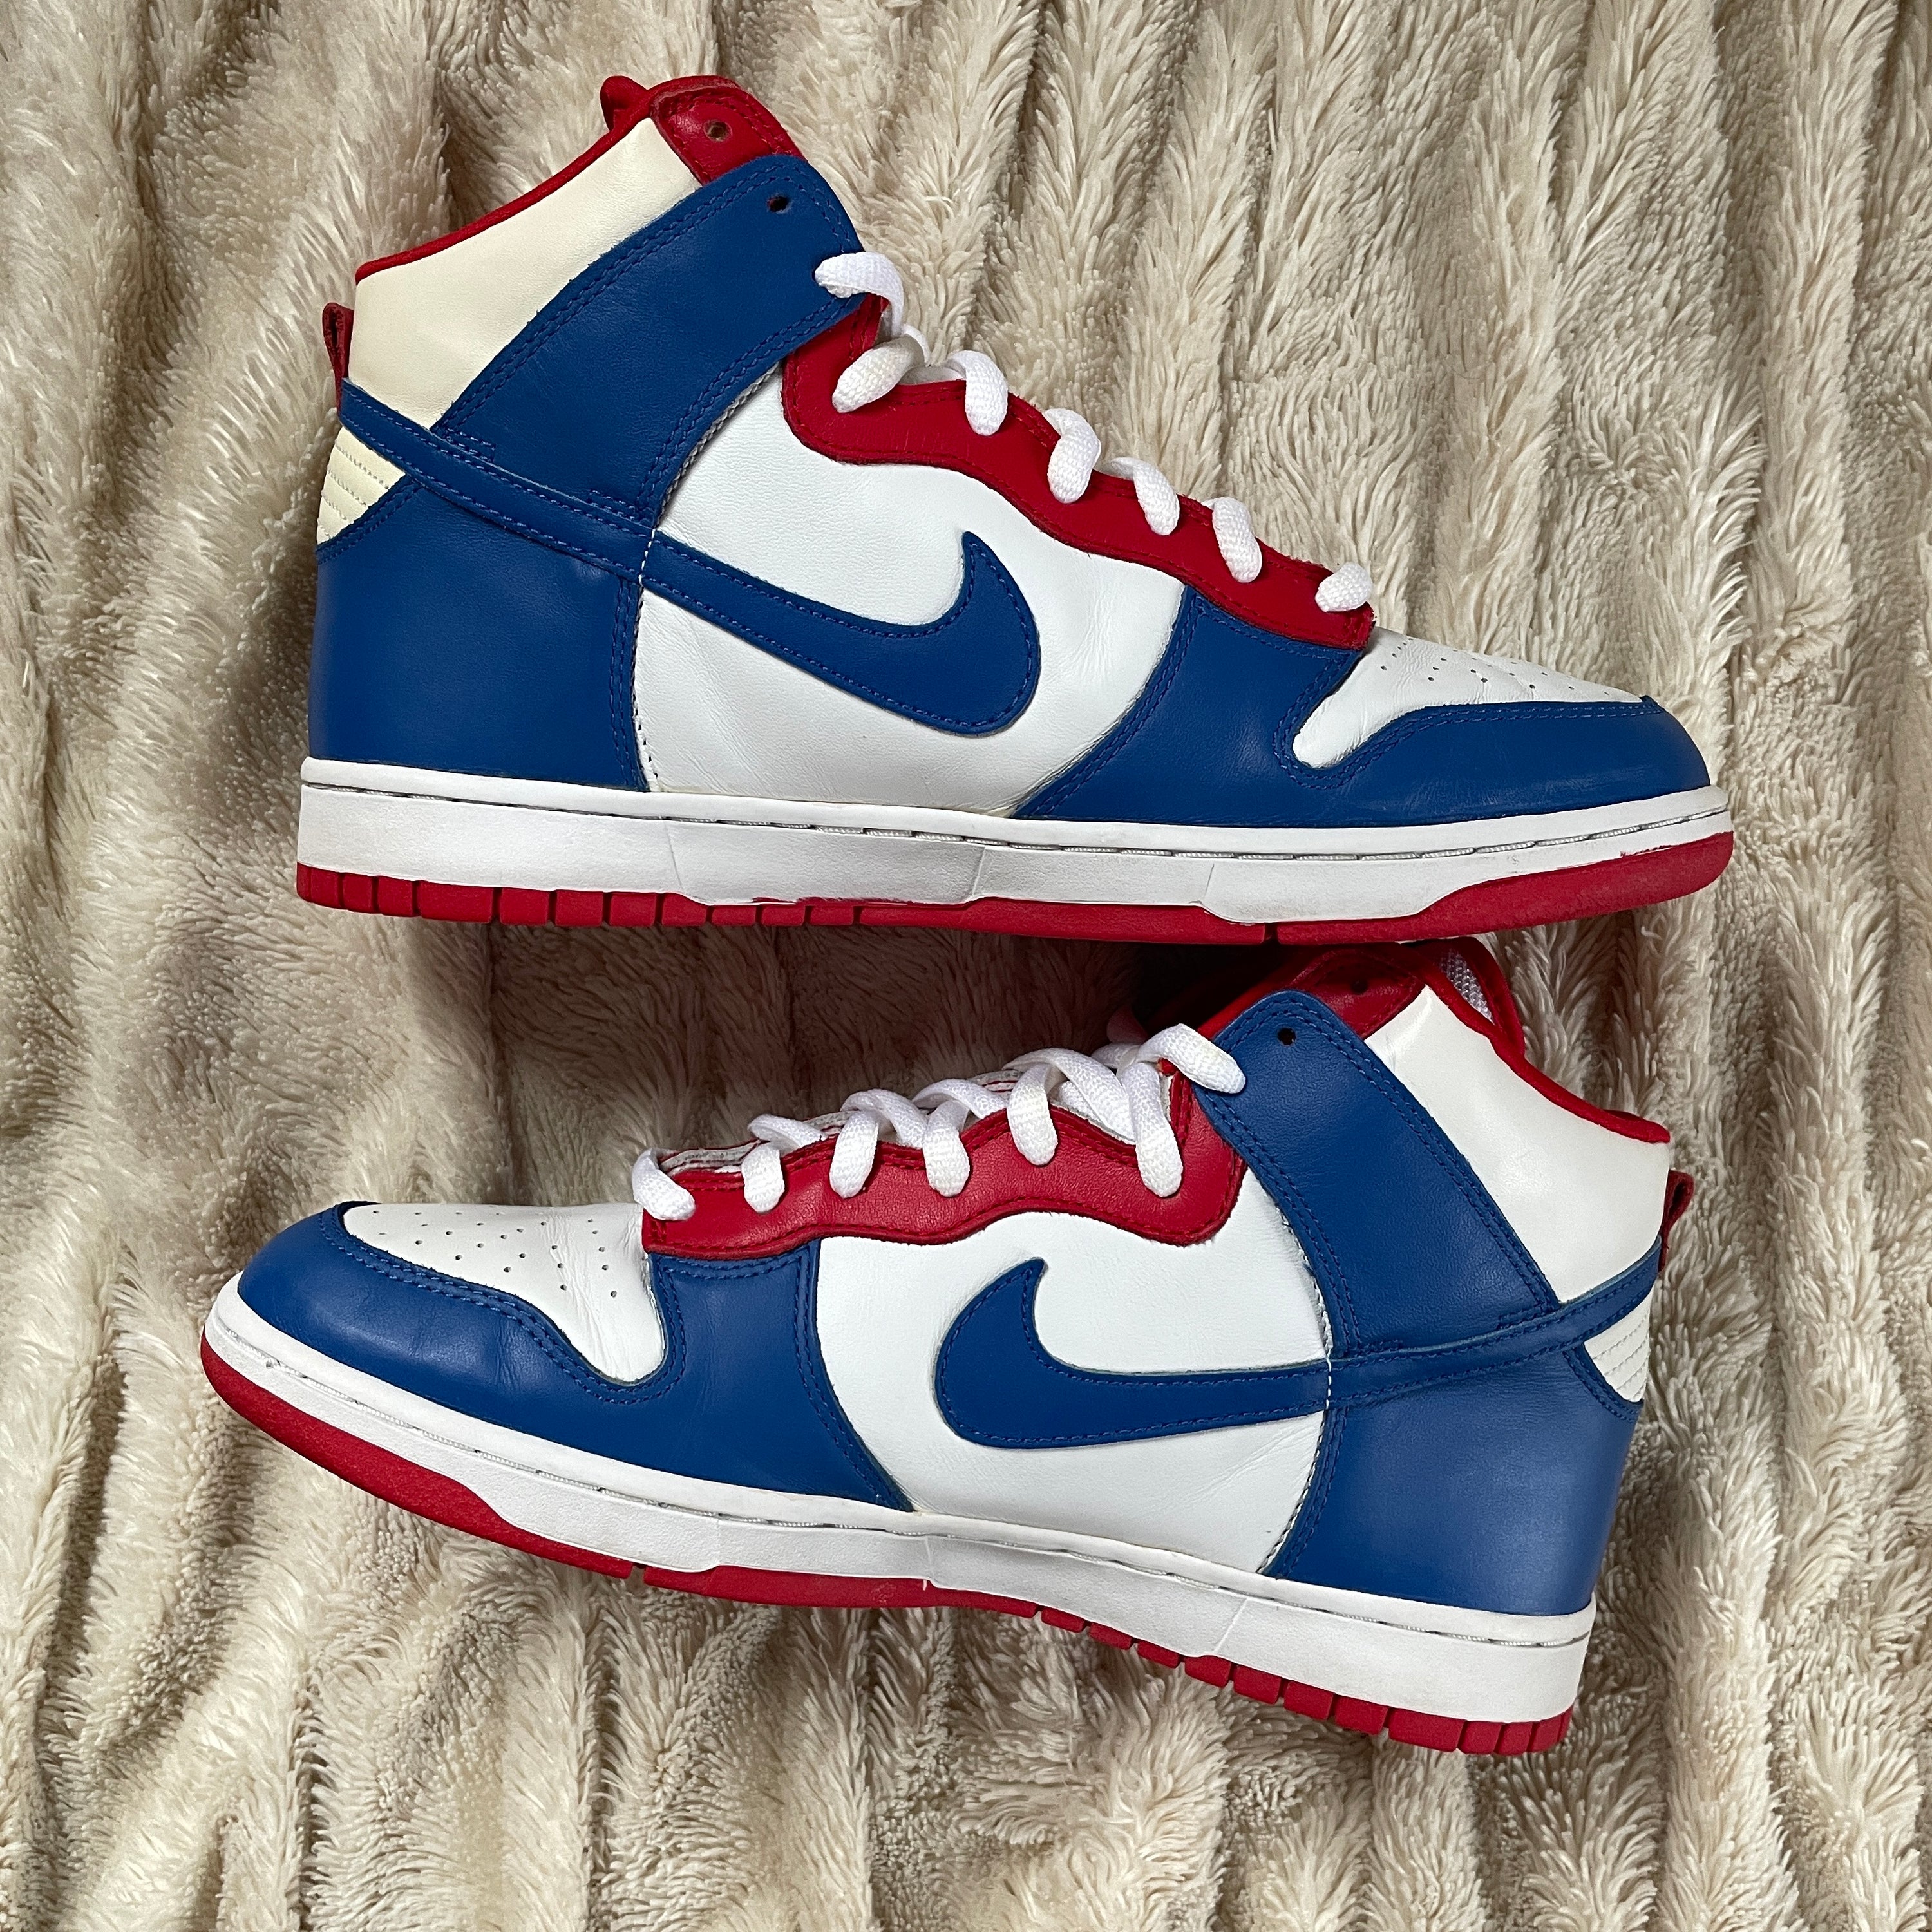 US 12 - NIKE DUNK HIGH EURO "BLUE SPORT RED" [2003]